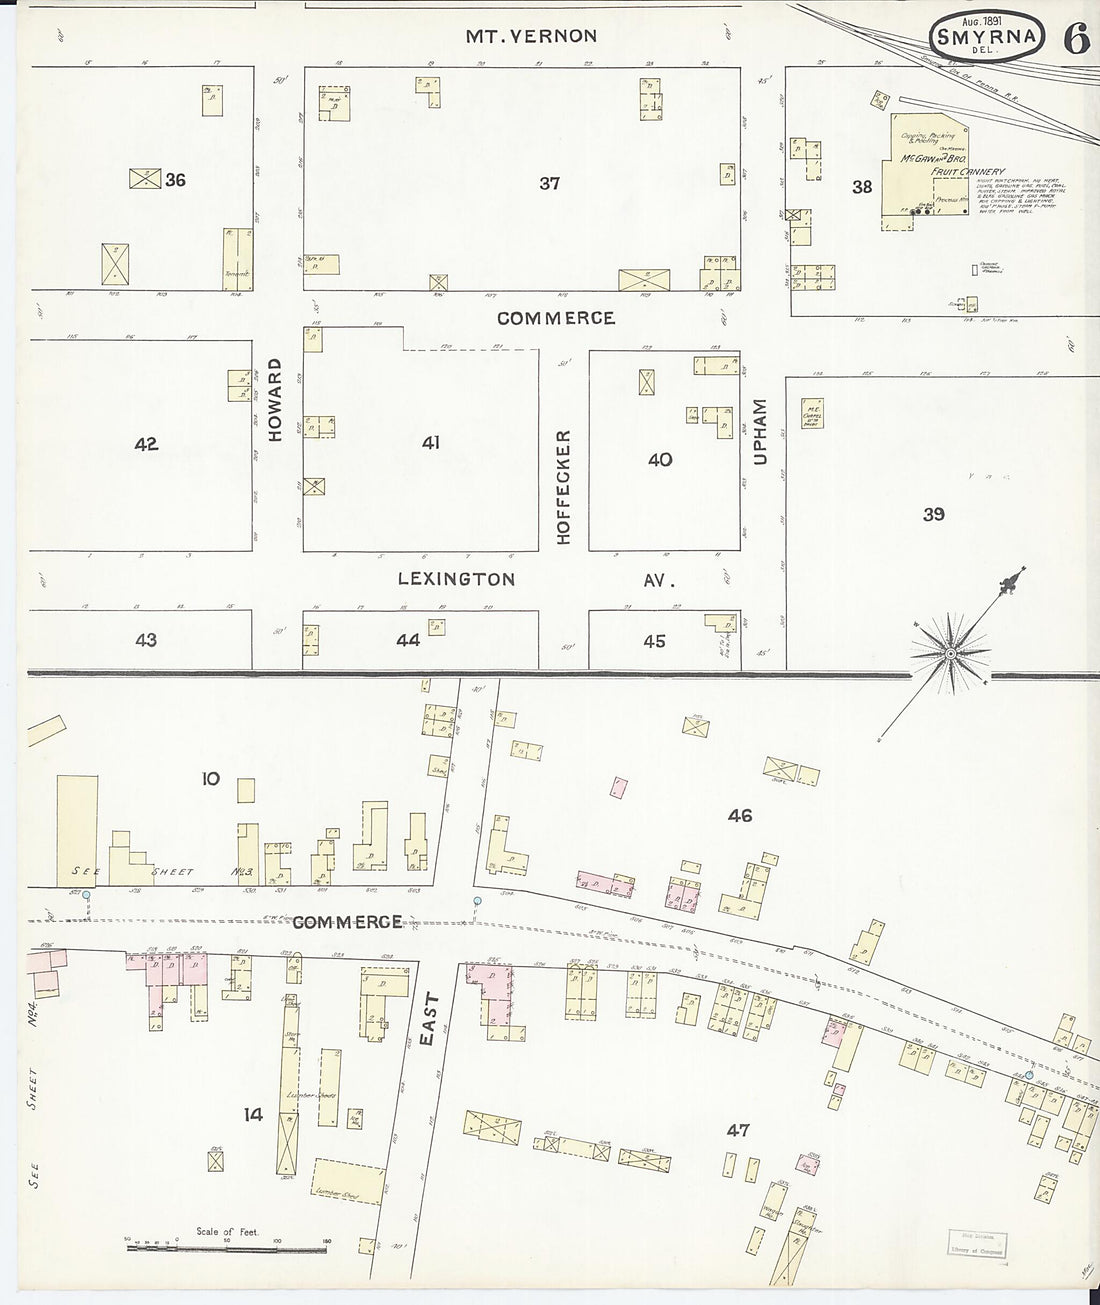 This old map of Smyrna, Kent County, Delaware was created by Sanborn Map Company in 1891